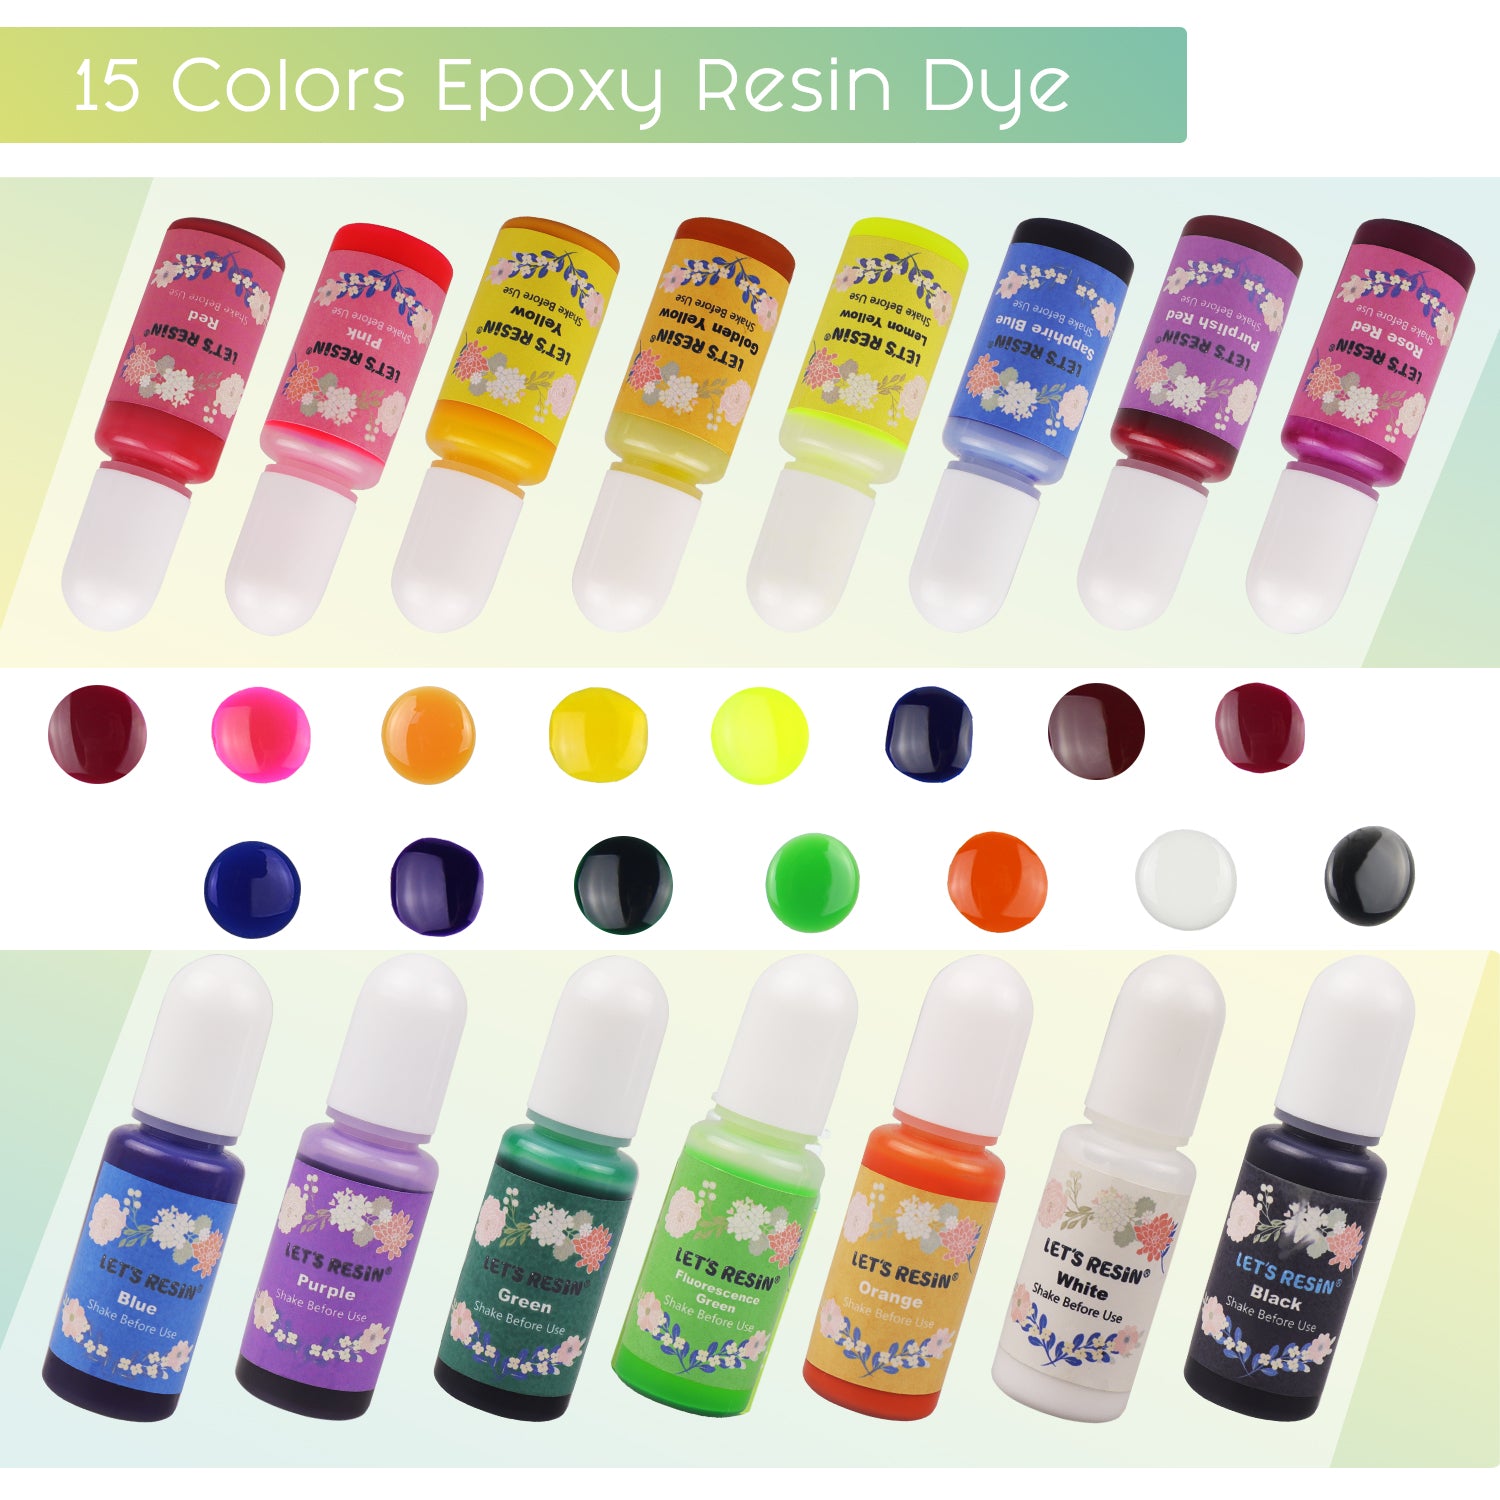 Let's Resin Epoxy Resin Dye, Translucent Resin Pigment for Coloring Resin, Non-Toxic Concentrated Liquid Resin Colorant